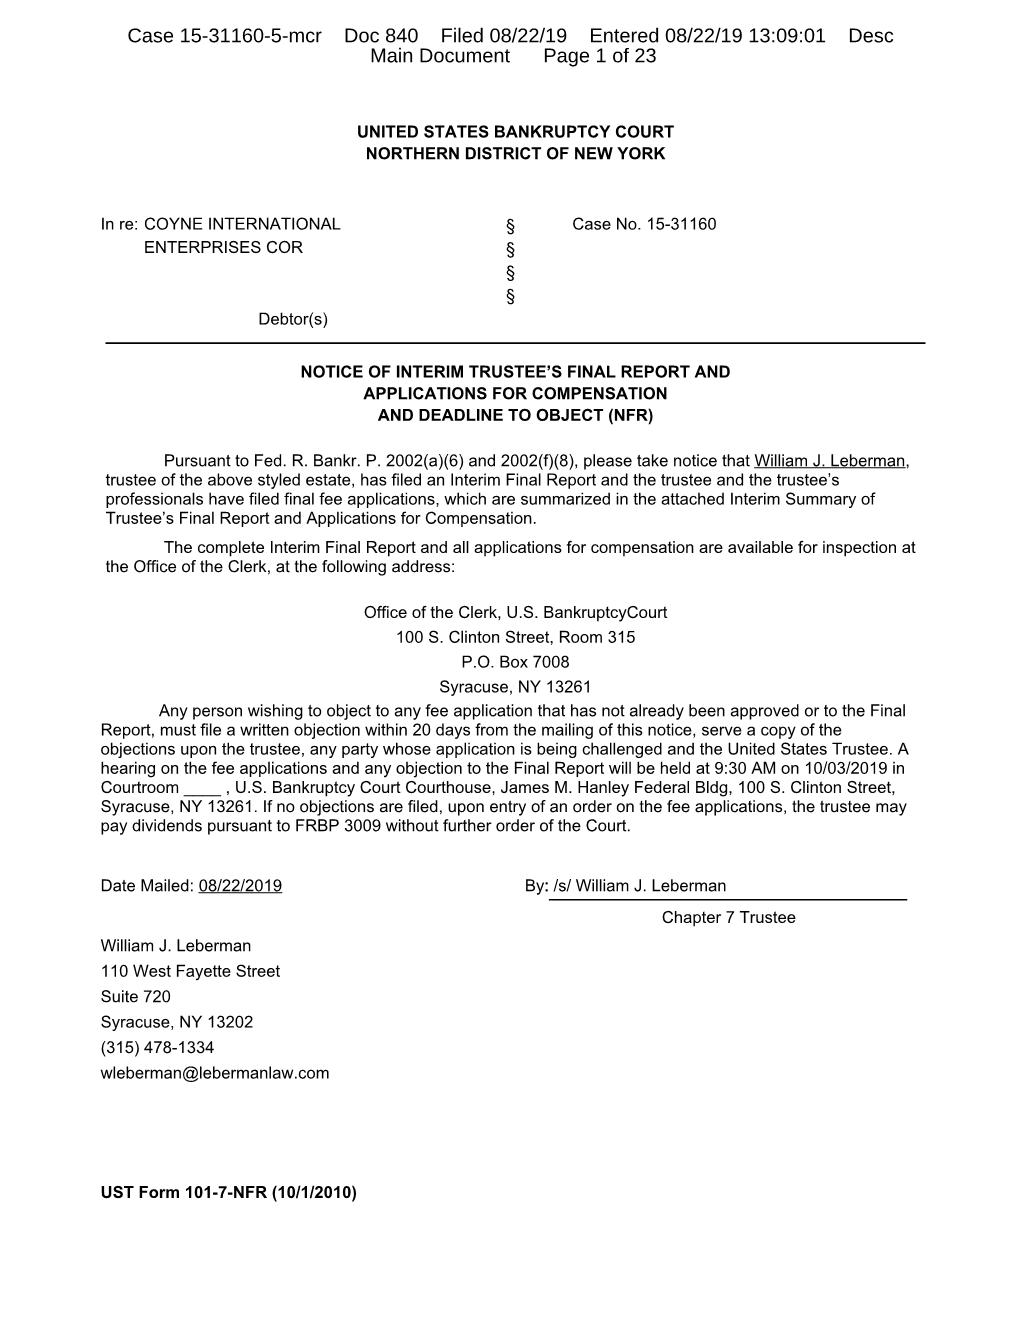 Case 15-31160-5-Mcr Doc 840 Filed 08/22/19 Entered 08/22/19 13:09:01 Desc Main Document Page 1 of 23